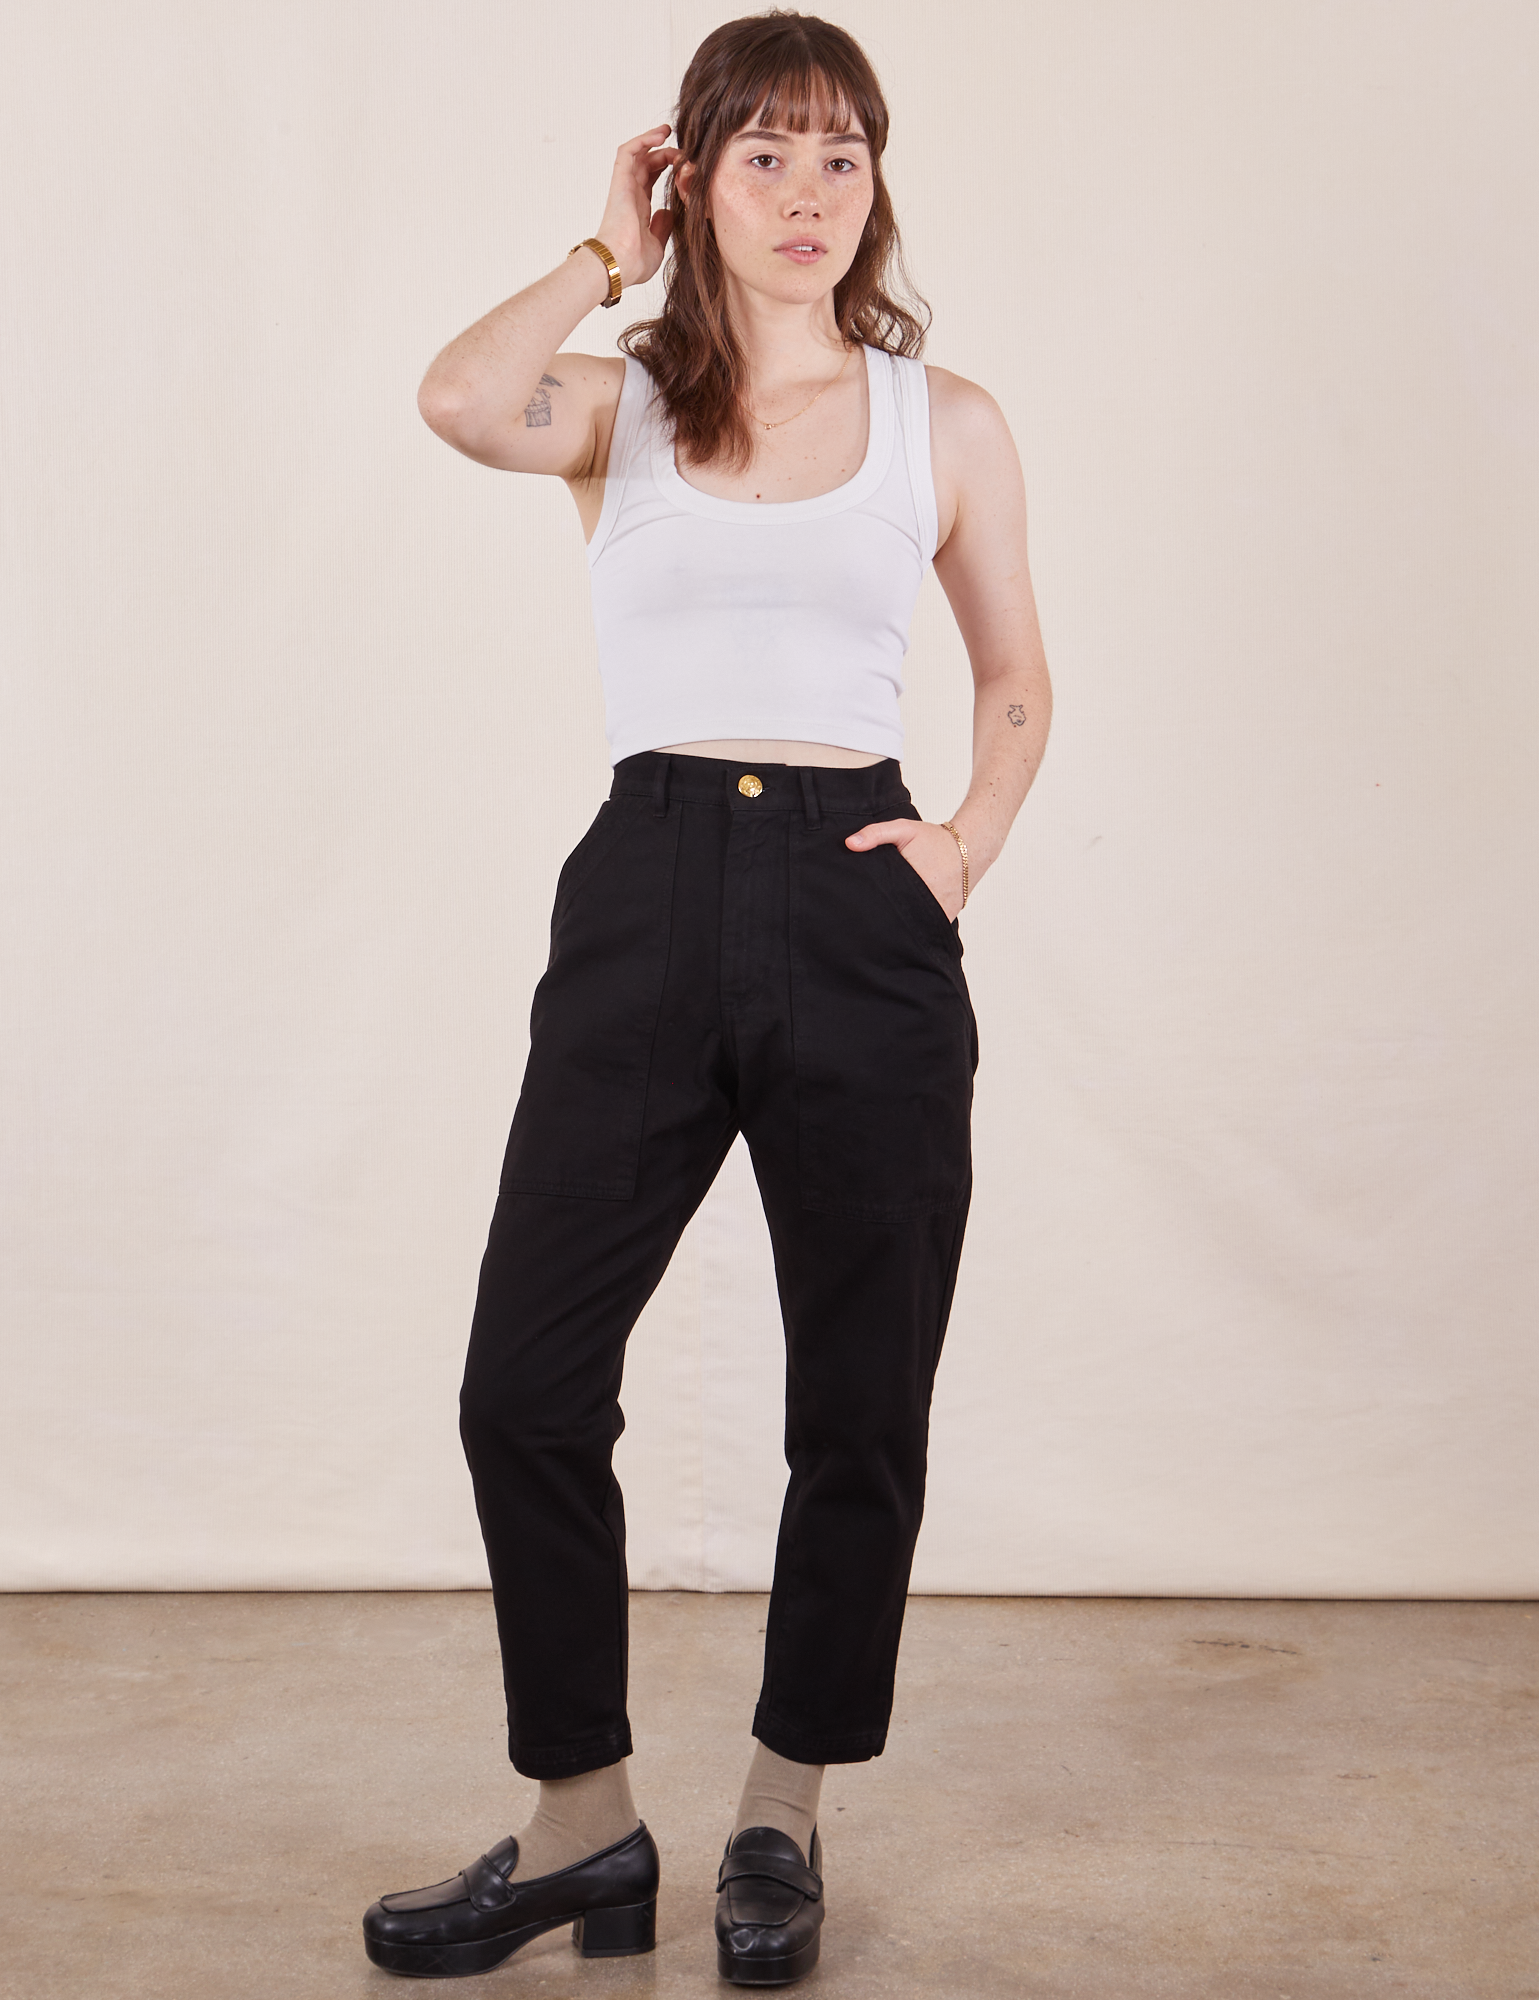 Hana is 5&#39;3&quot; and wearing XXS Petite Pencil Pants in Basic Black paired with Cropped Tank Top in vintage tee off-white